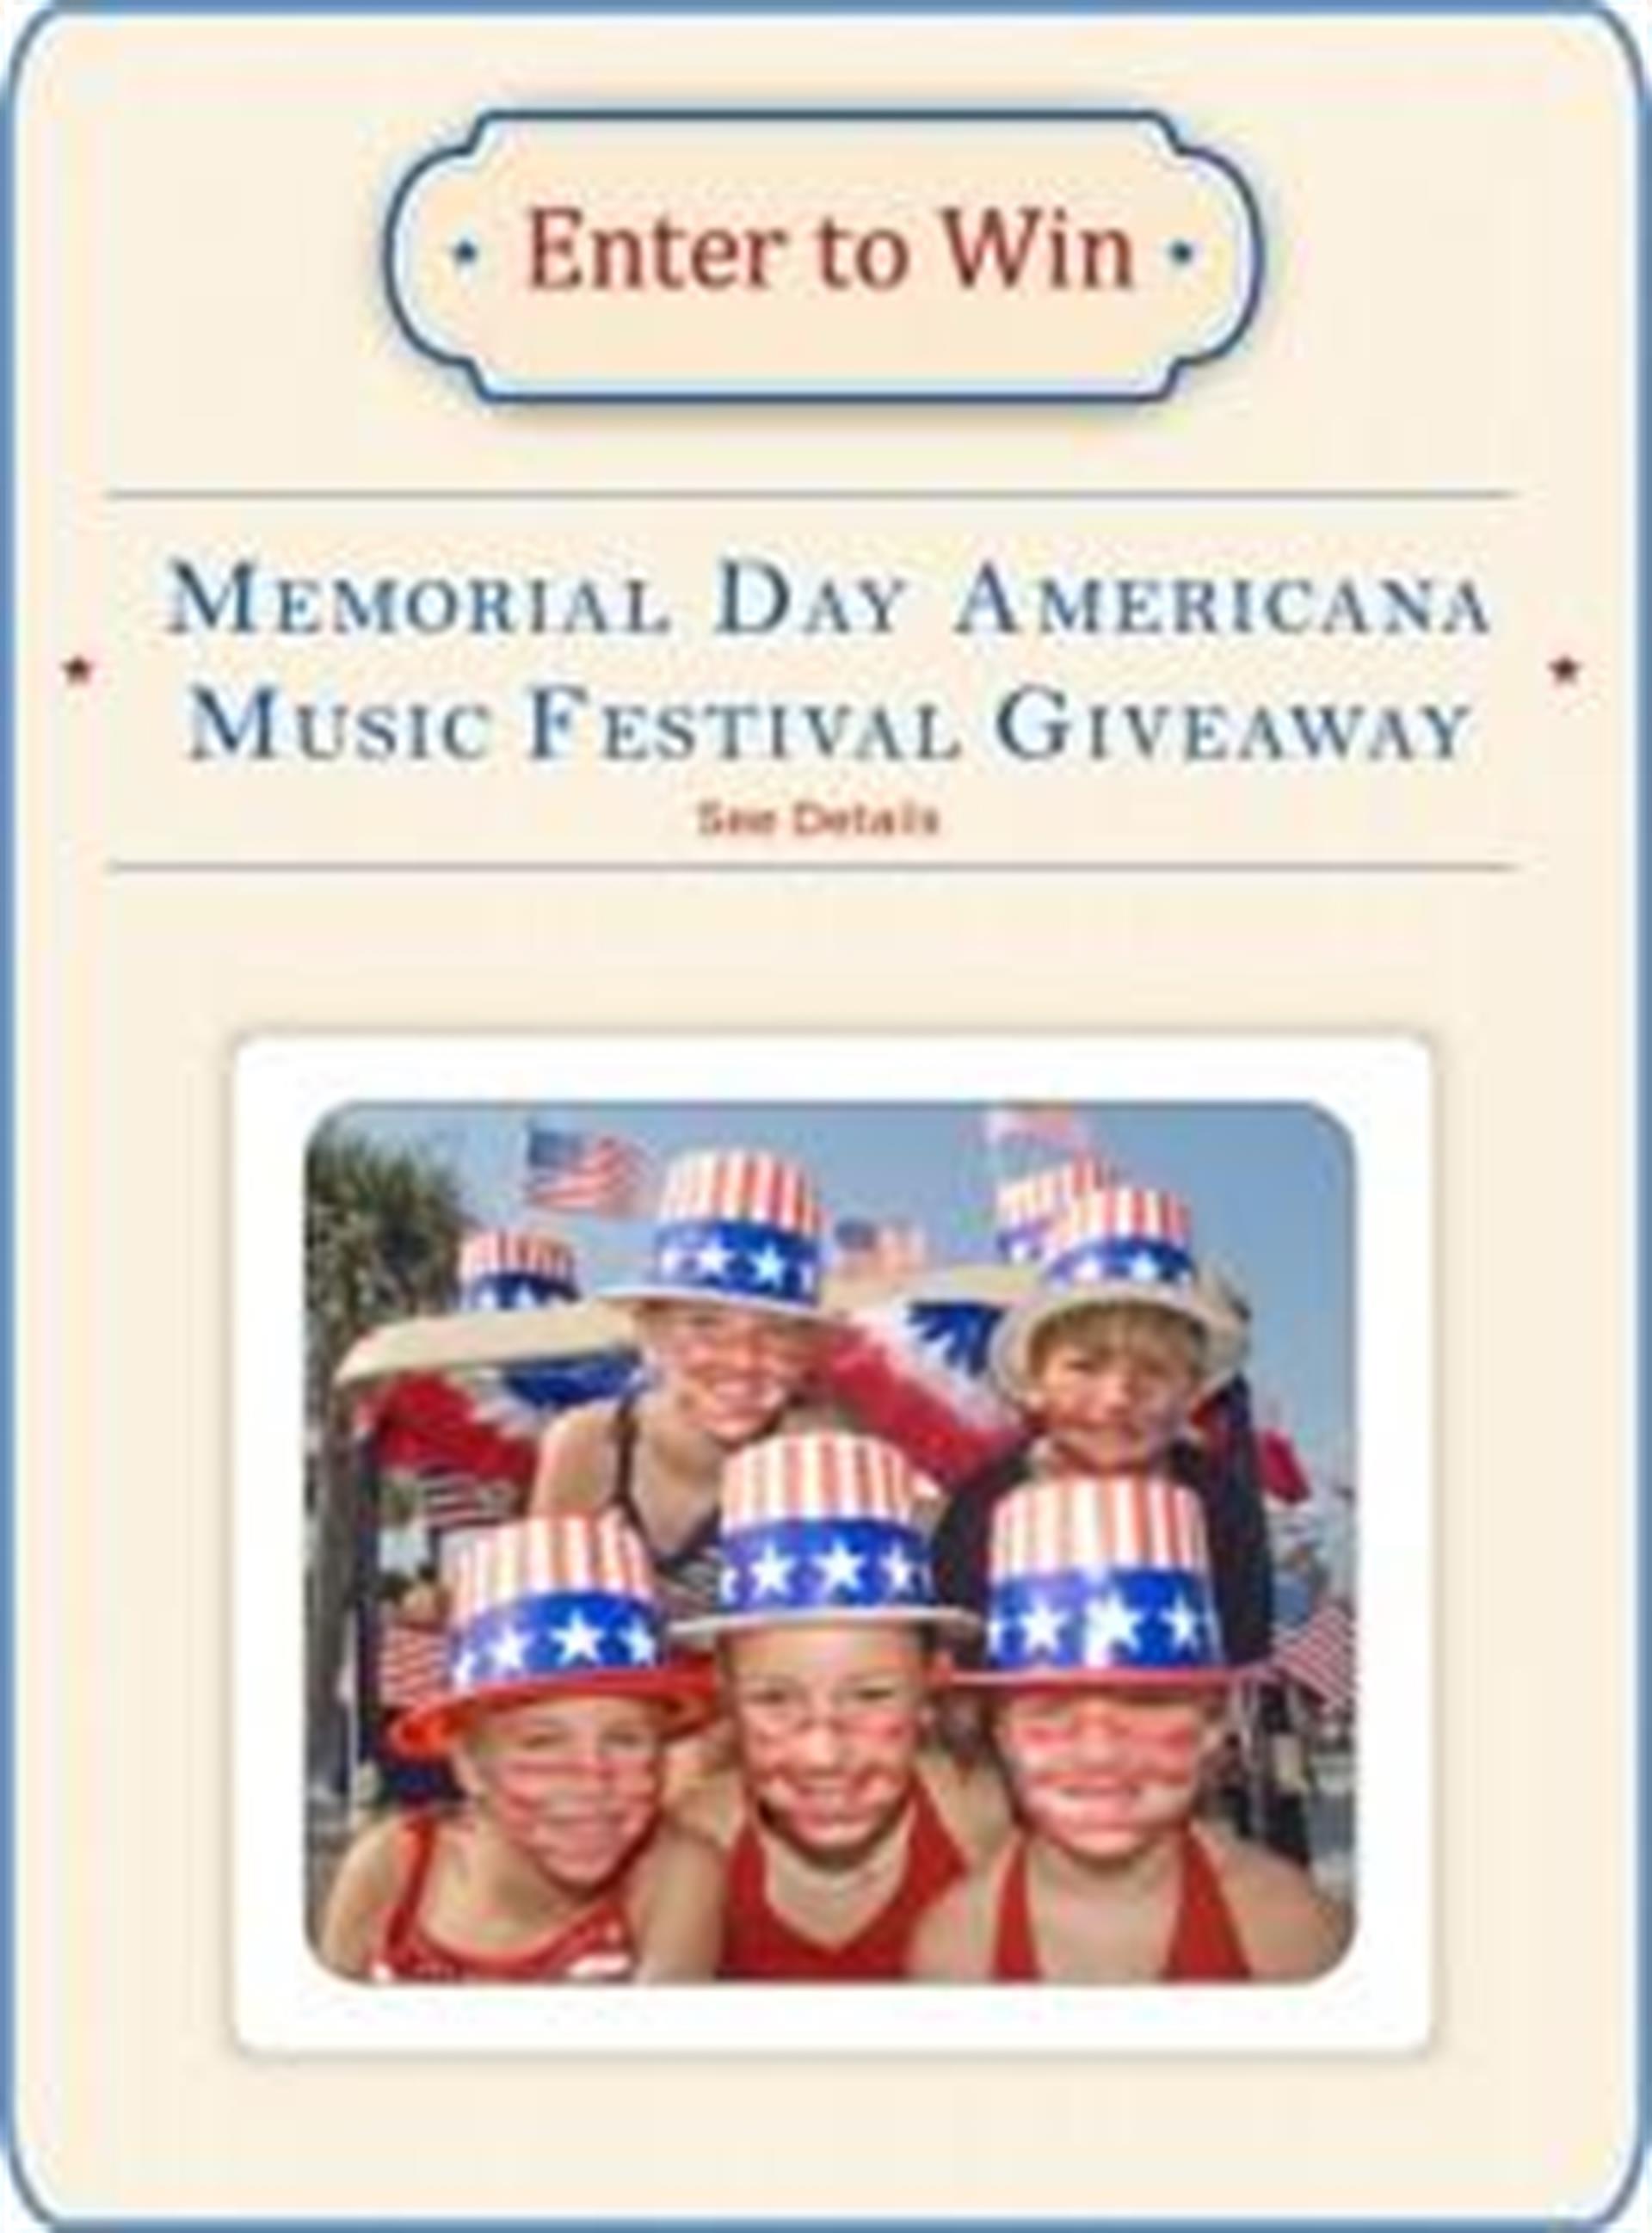 Enter our Memorial Day Americana Music Festival Giveaway on Facebook to win